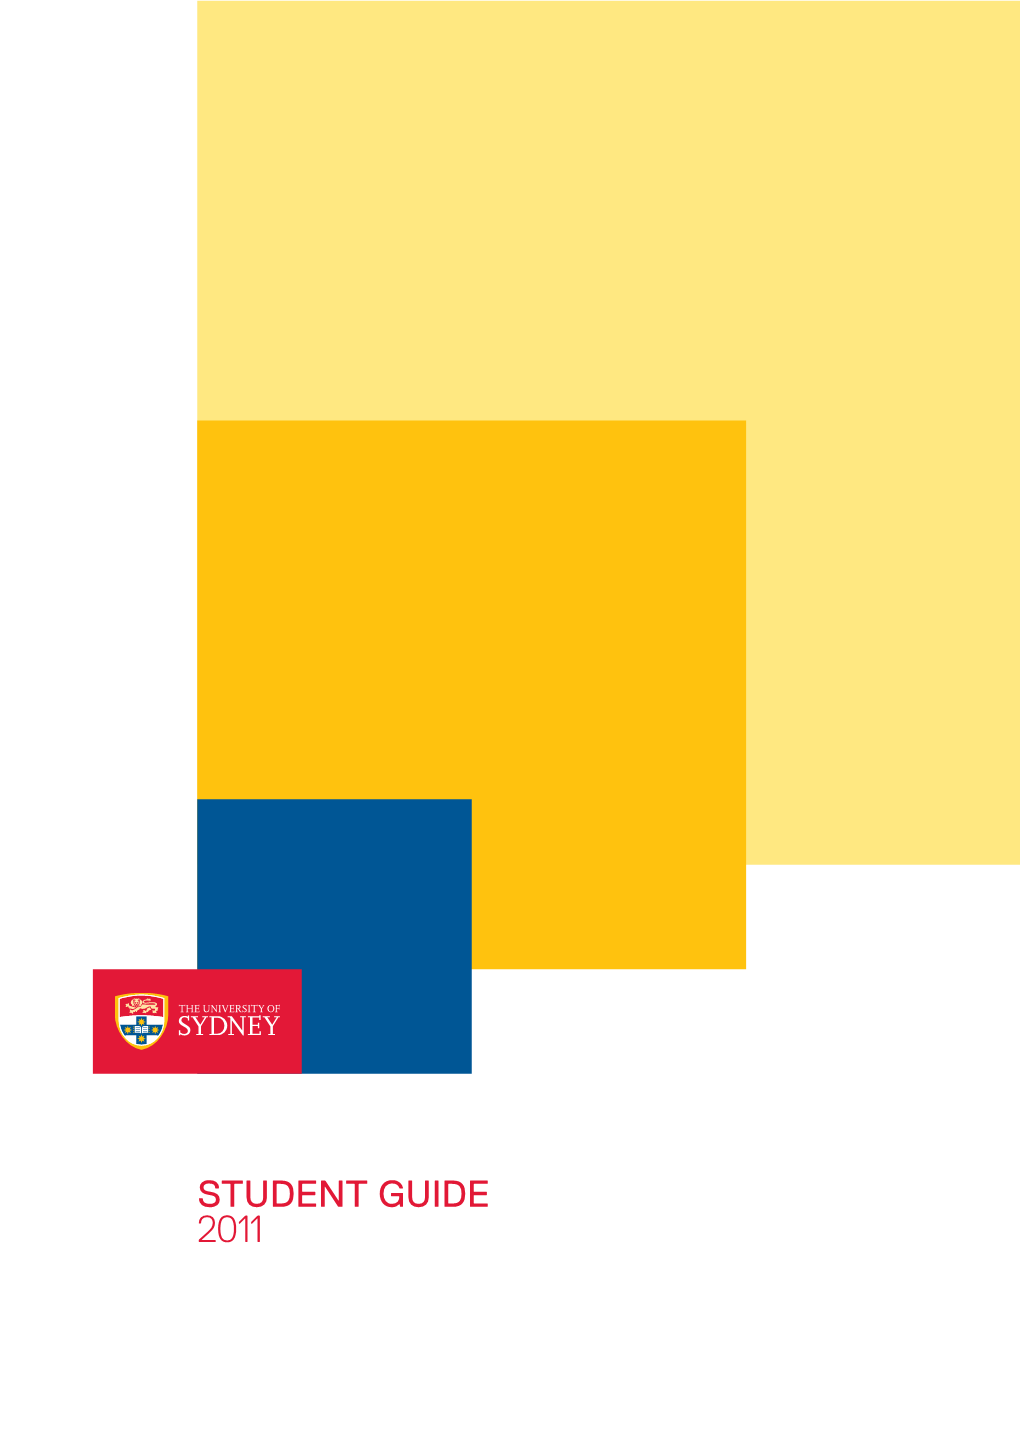 Student Guide 2011 Contents